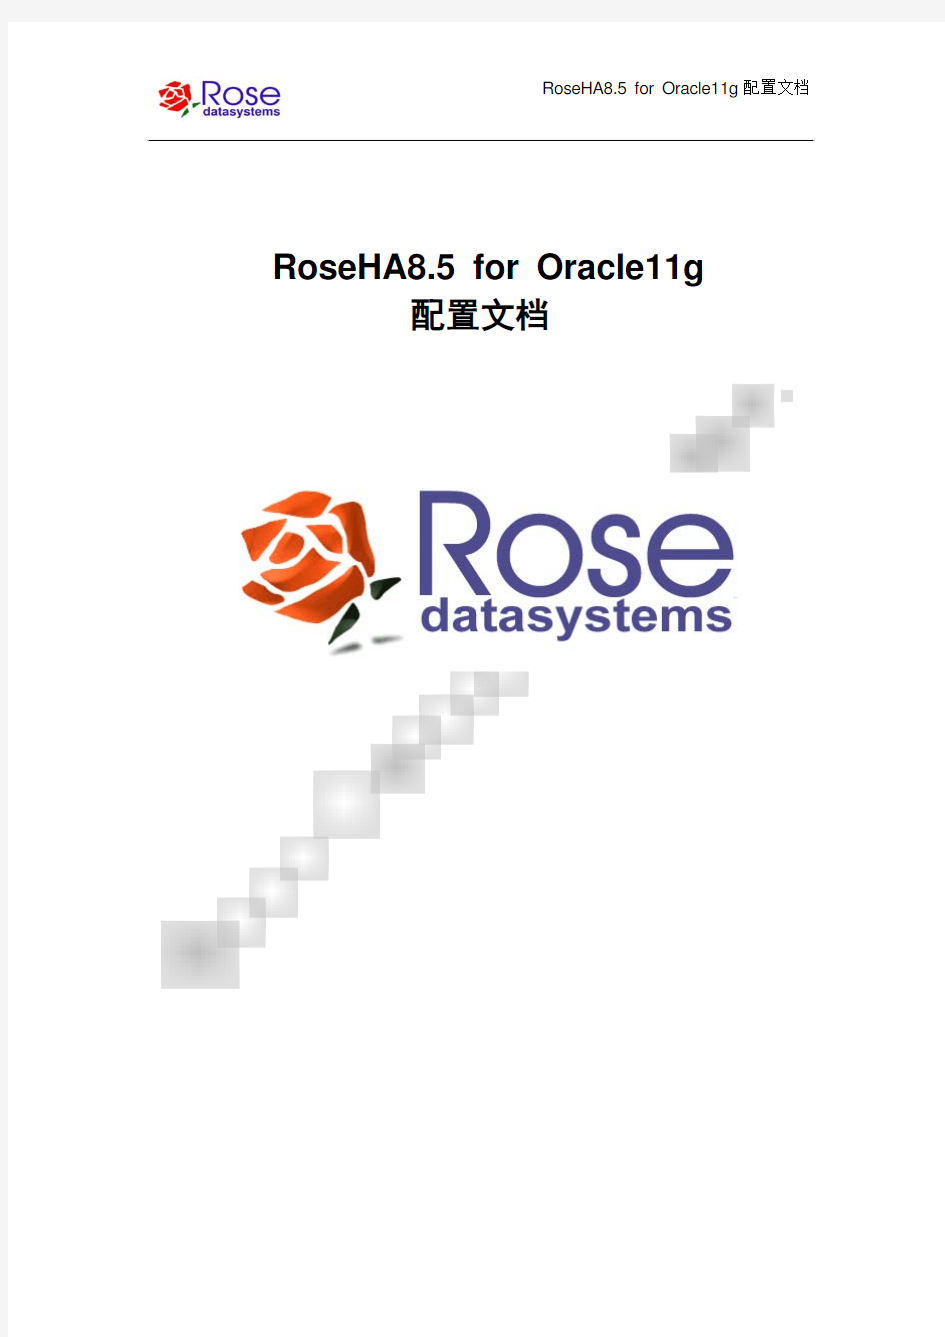 RoseHA8.5 for Windows Oracle11g配置文档_2009-08-05